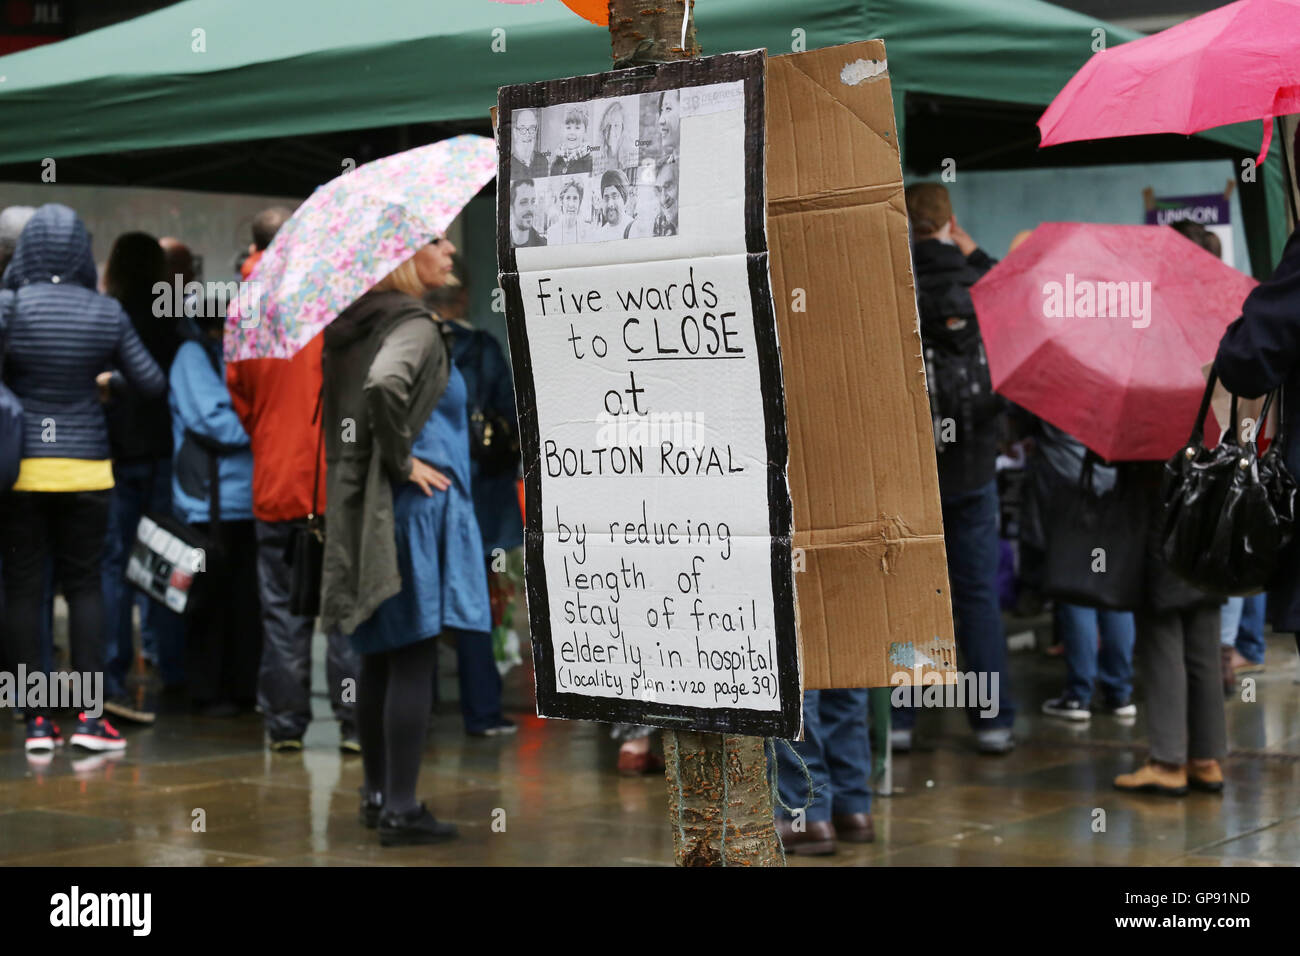 Bolton, Lancashire, UK. 3rd September, 2016. Save Our NHS Rally takes place in Bolton. A placard which reads 'Five wards to close at Bolton Royal by reducing length of stay of frail elderly in hospital',  Bolton, 3rd September, 2016 Credit:  Barbara Cook/Alamy Live News Stock Photo